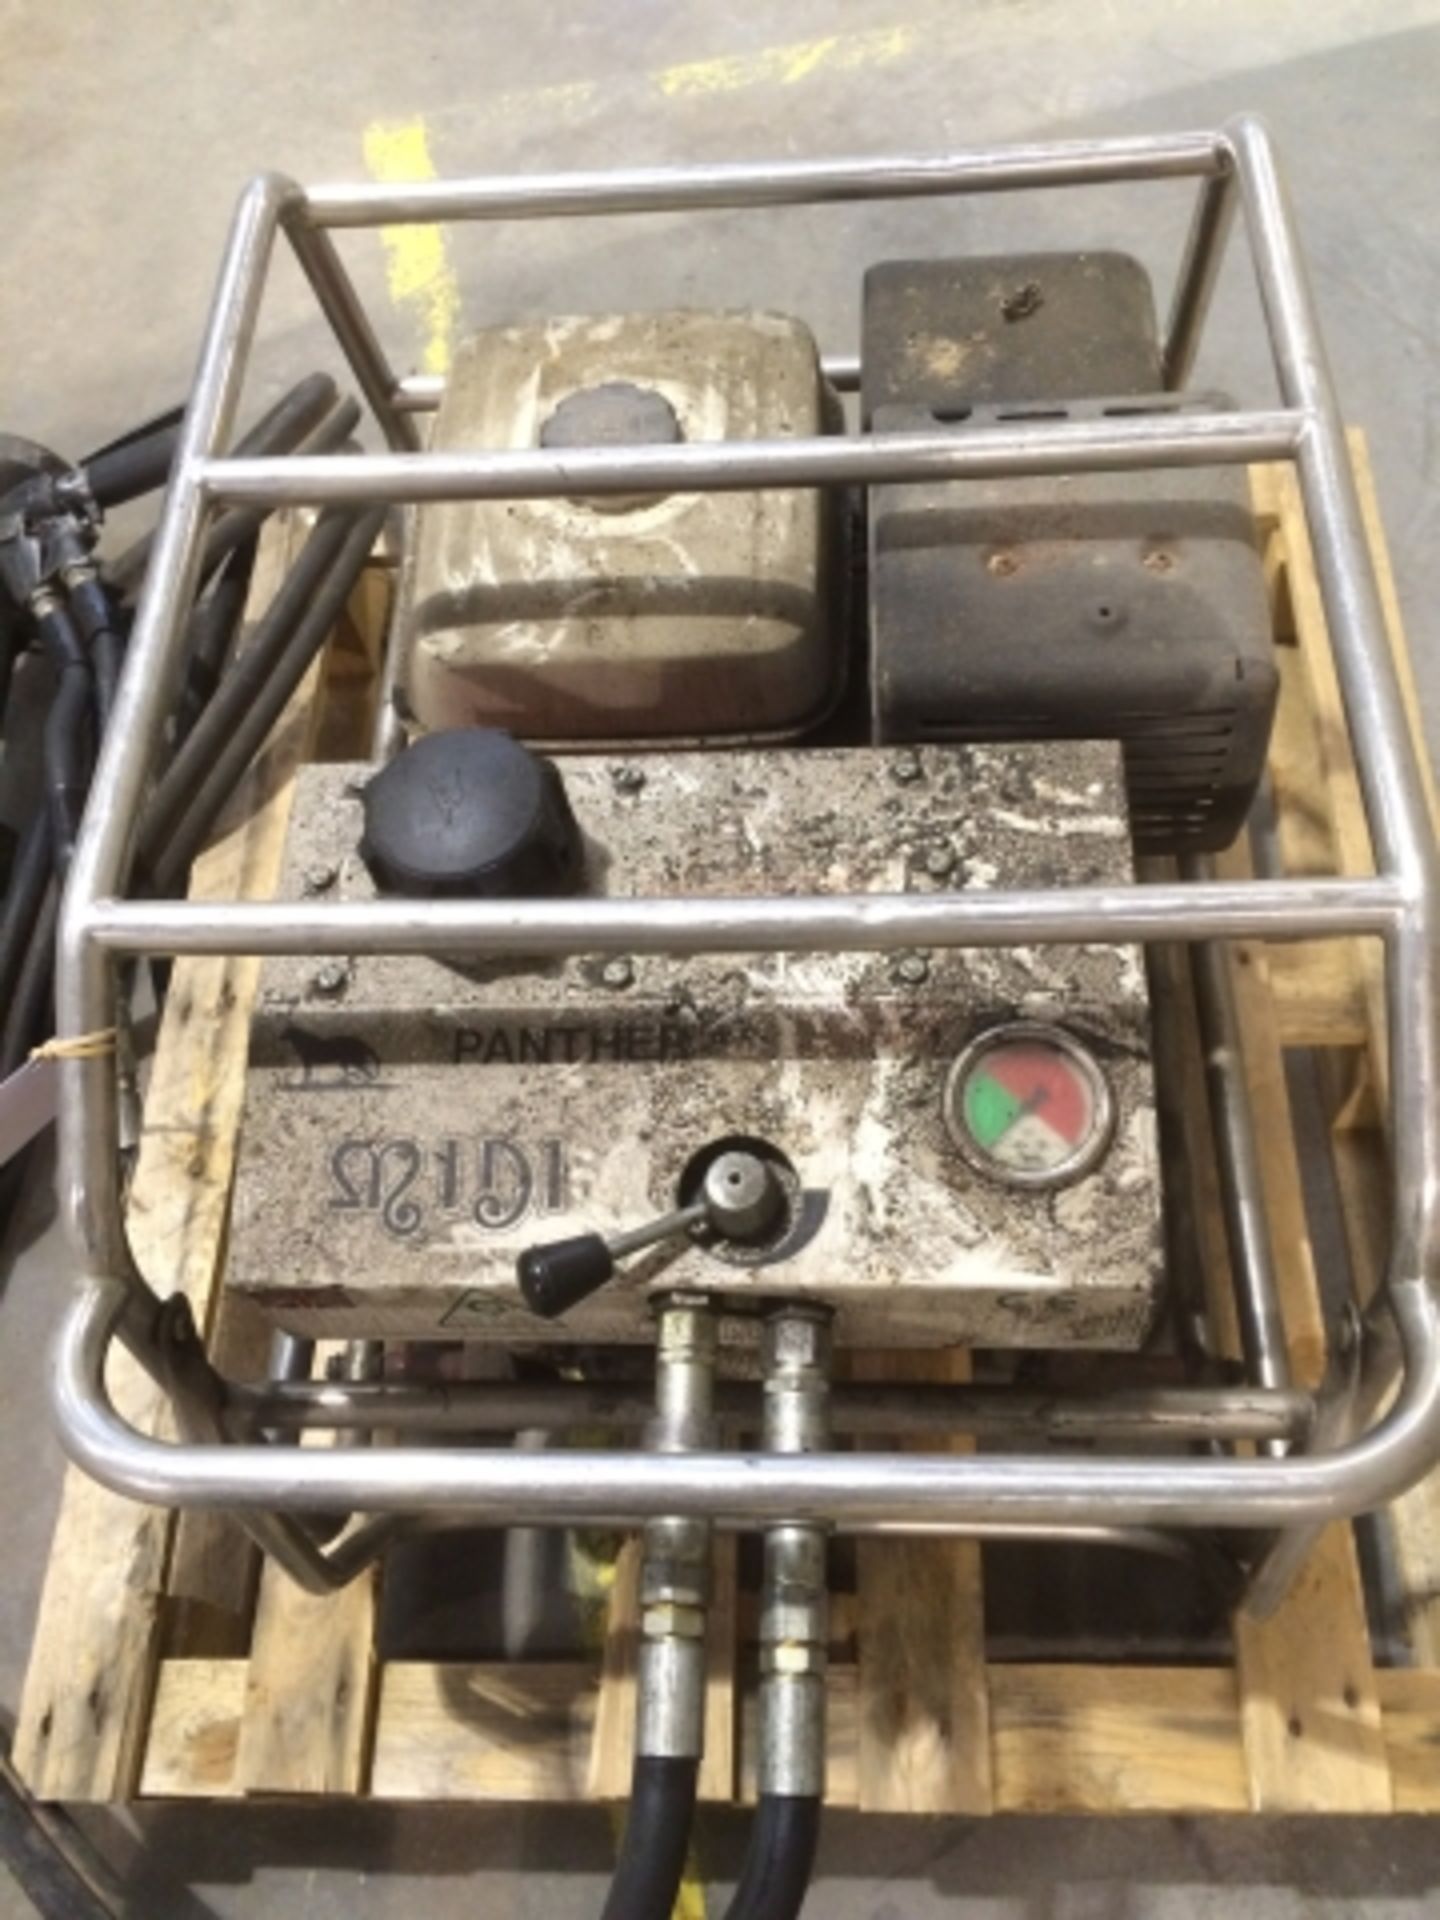 * Panther Midi Hydraulic Power Pack and a Breaker. This lot is located at the former North